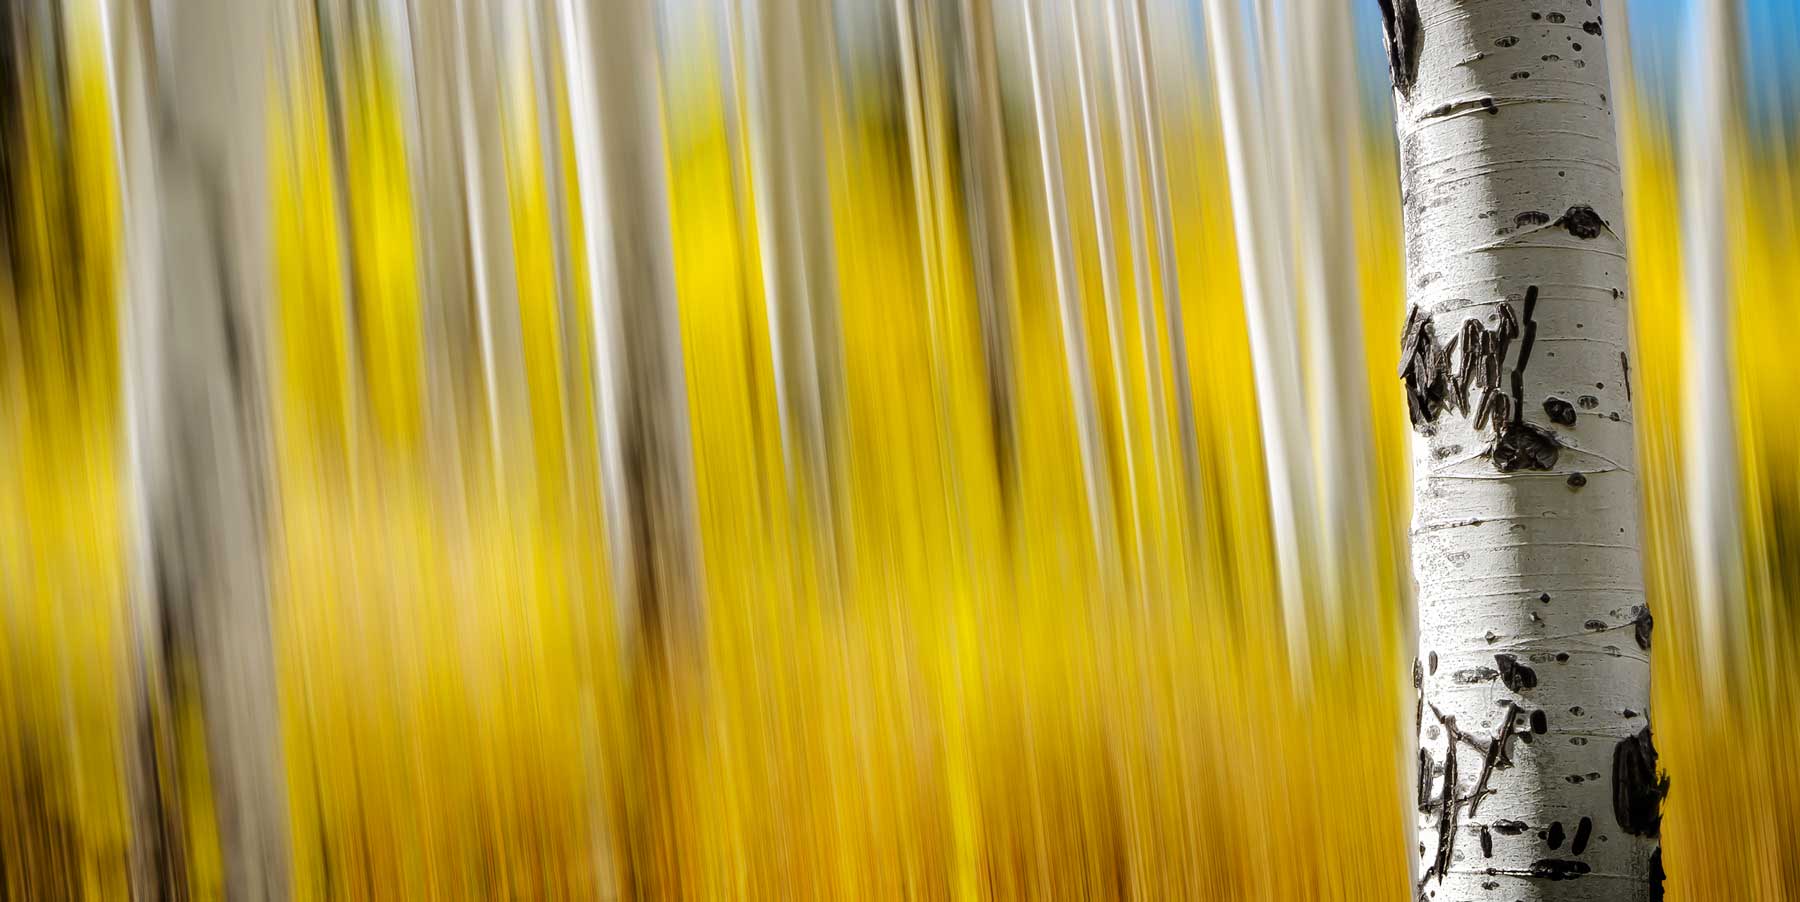 motion blurred imagery of yellow leaves on white barked aspen trees